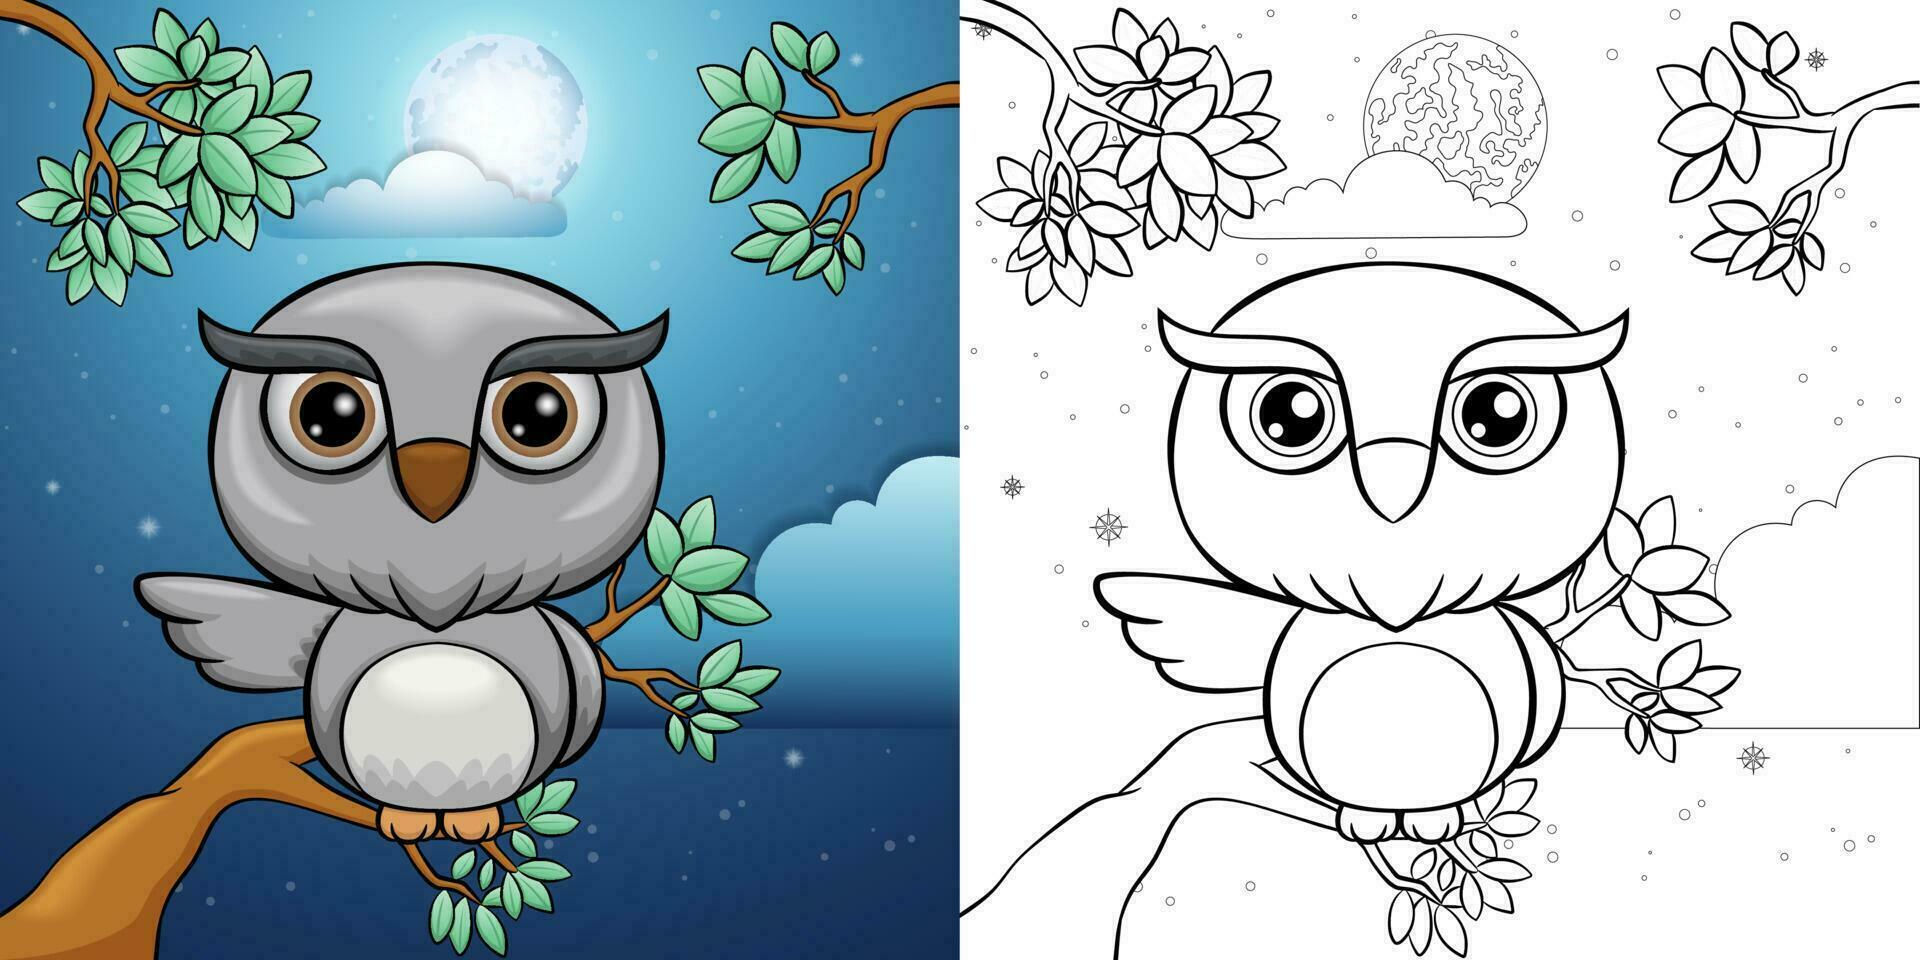 Cartoon of owl perching on tree branches at night on full moon background vector